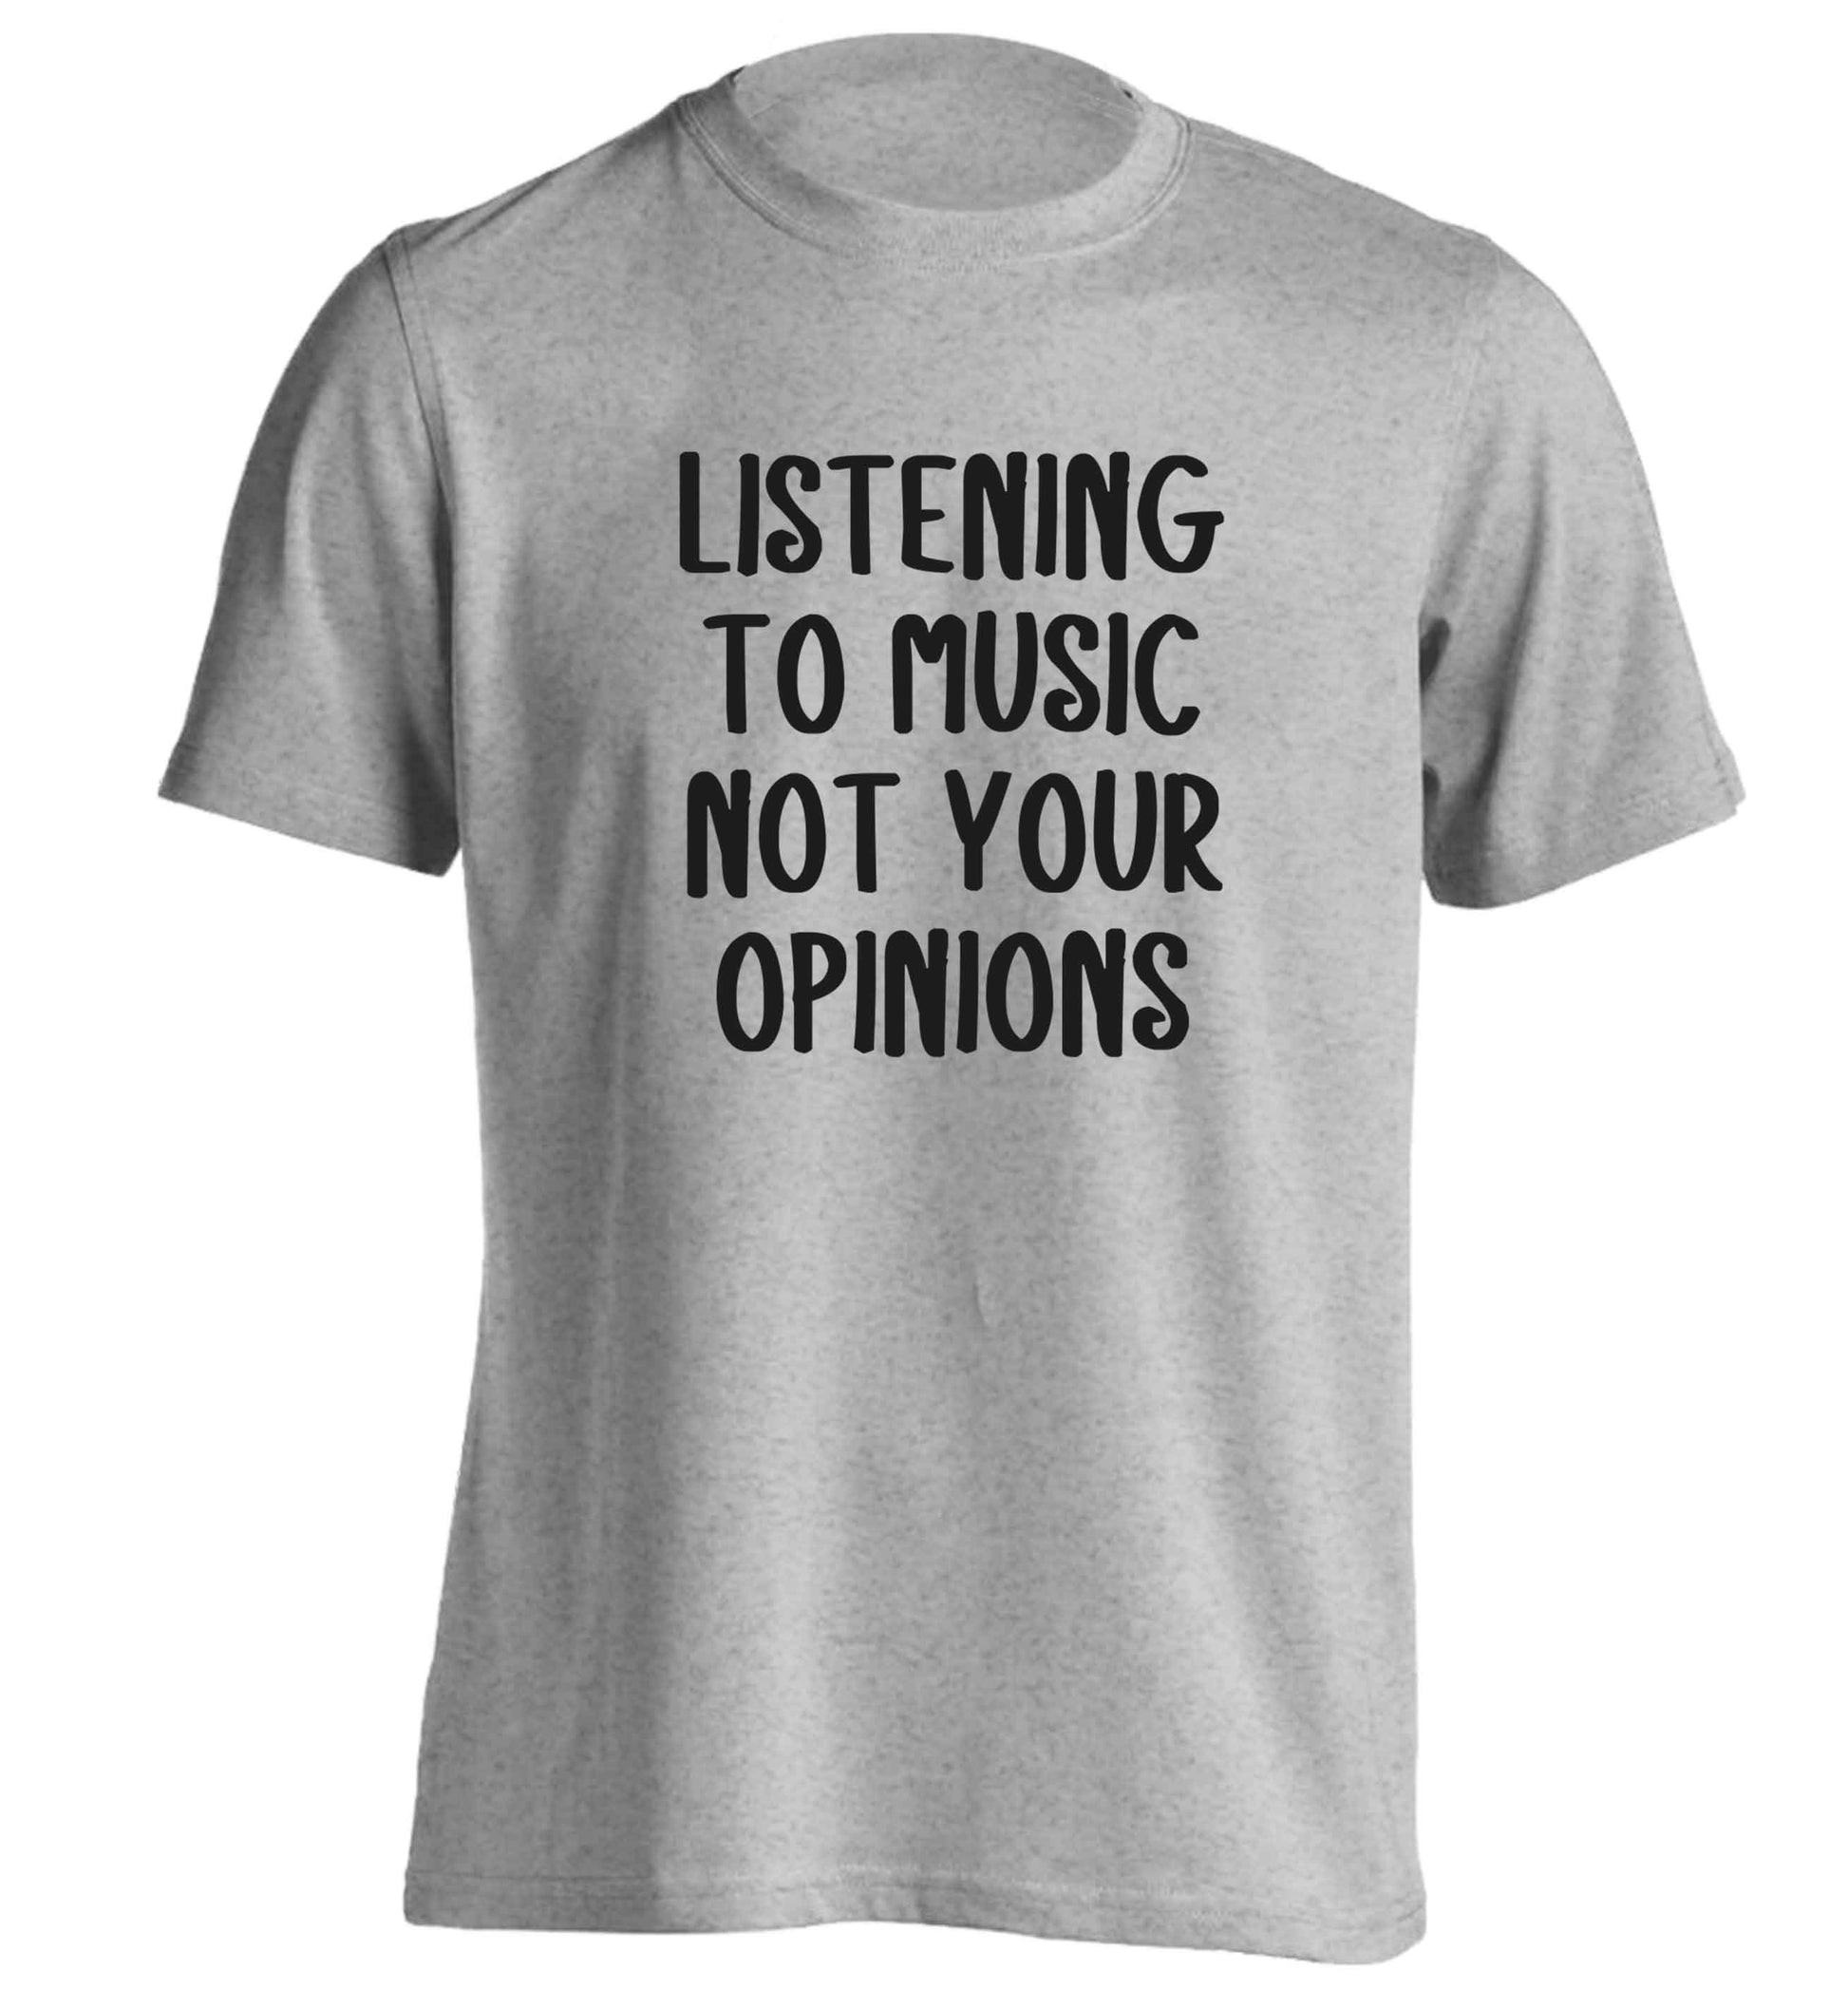 Listening to music not your opinions adults unisex grey Tshirt 2XL